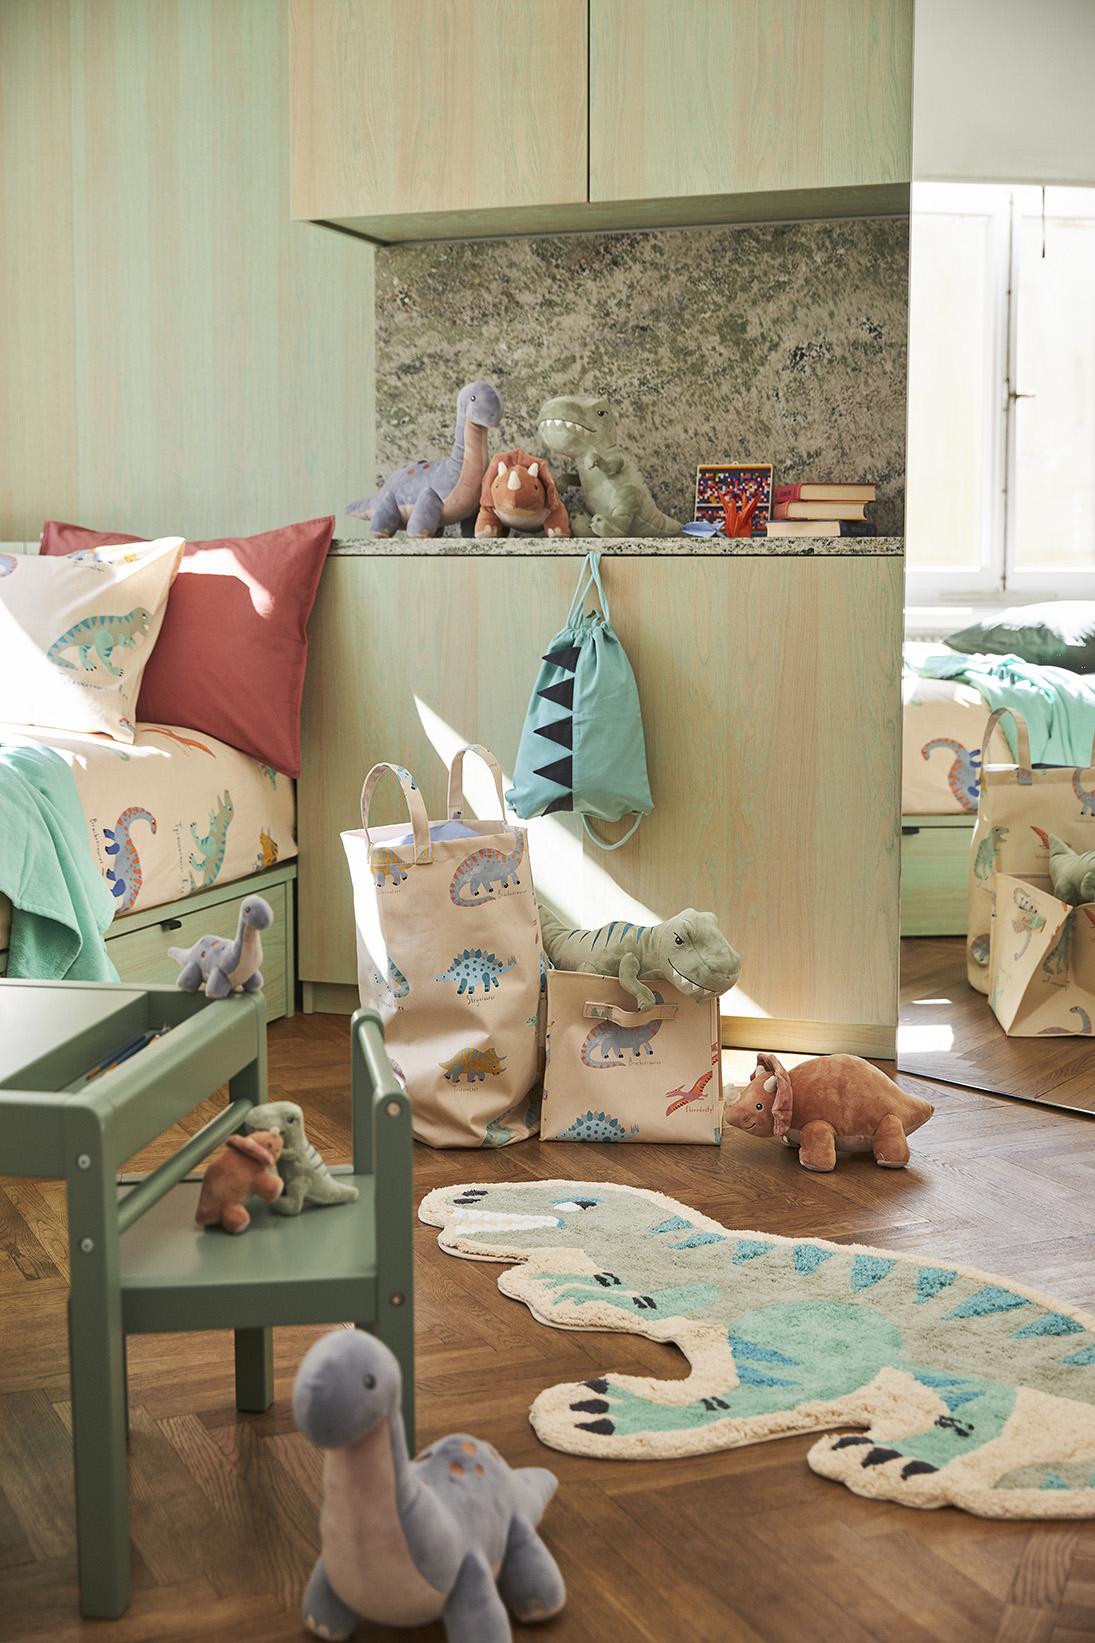 H&M HOME's Playful Back-to-School Collection for Kids